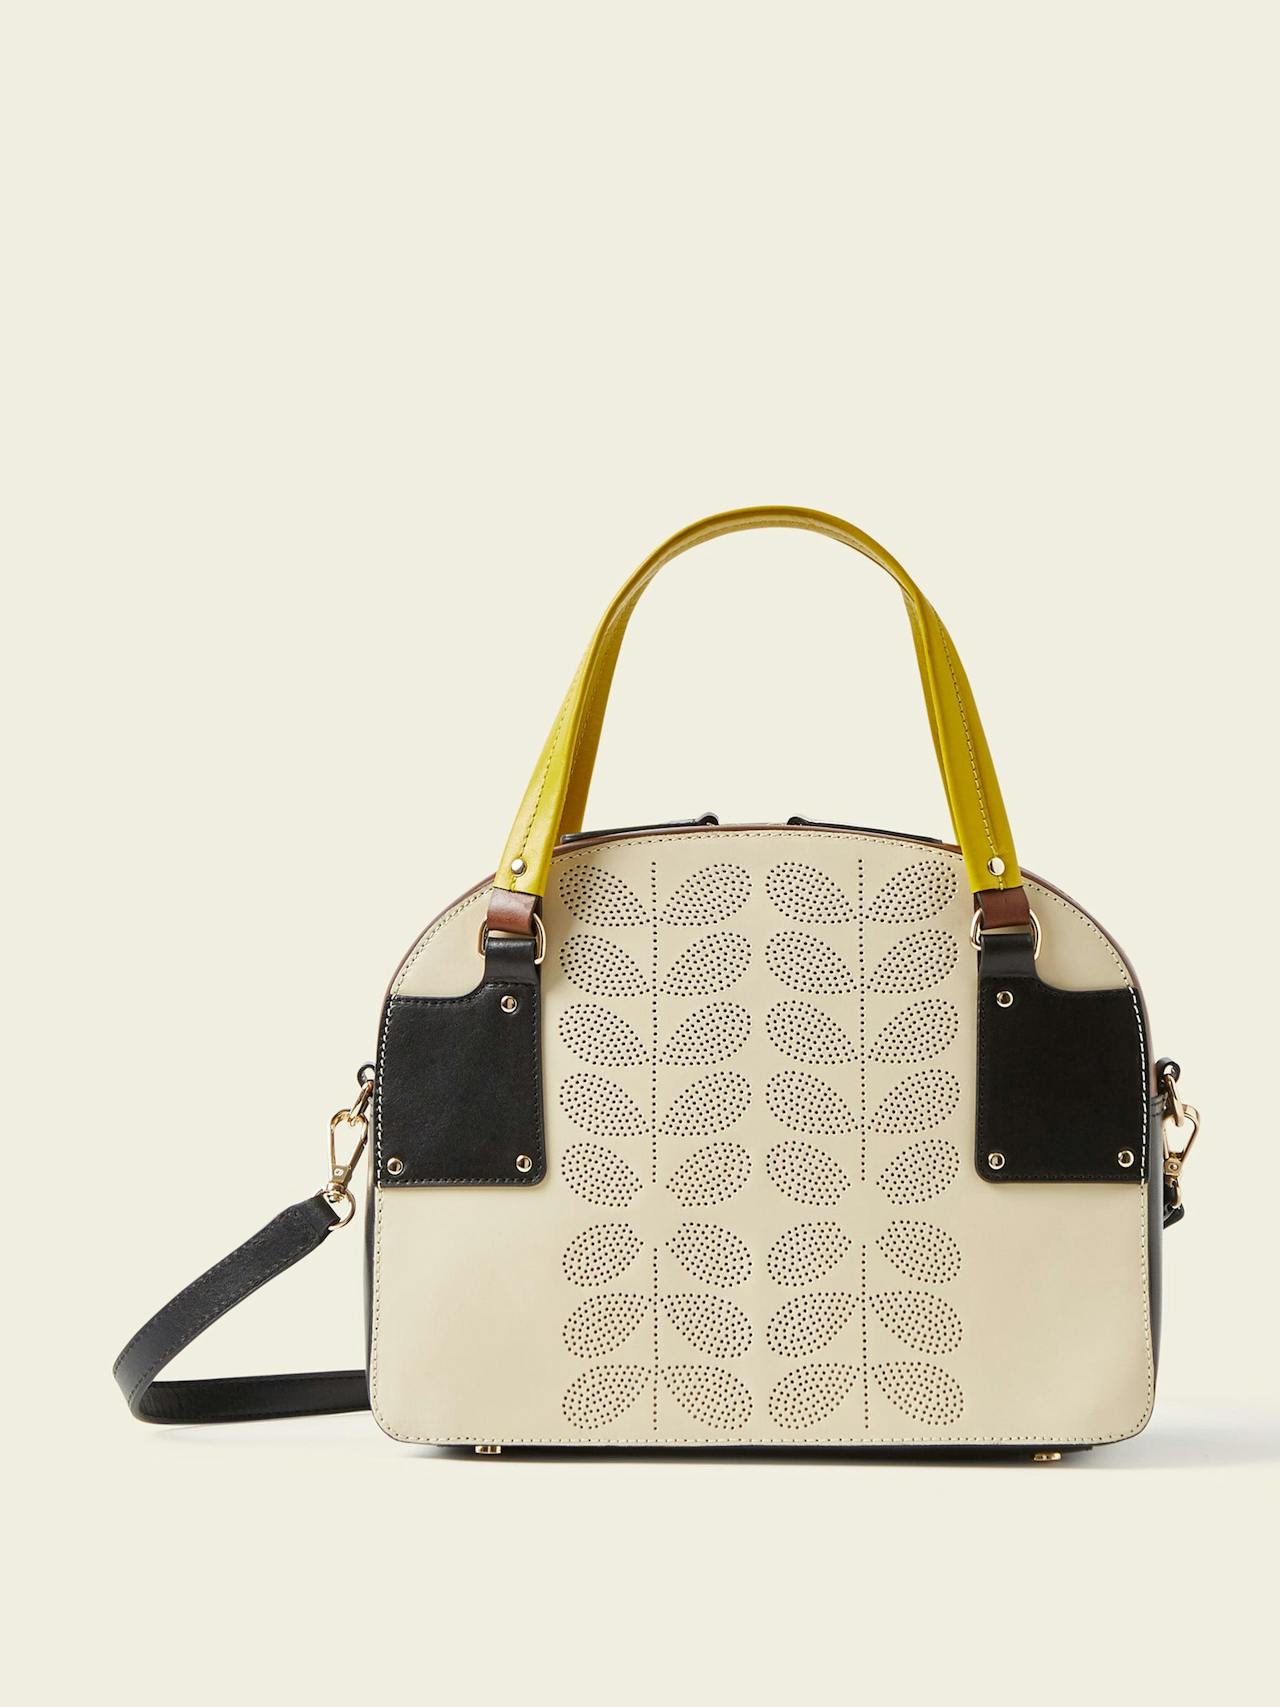 Luna bowling bag in Cream Punched Flower